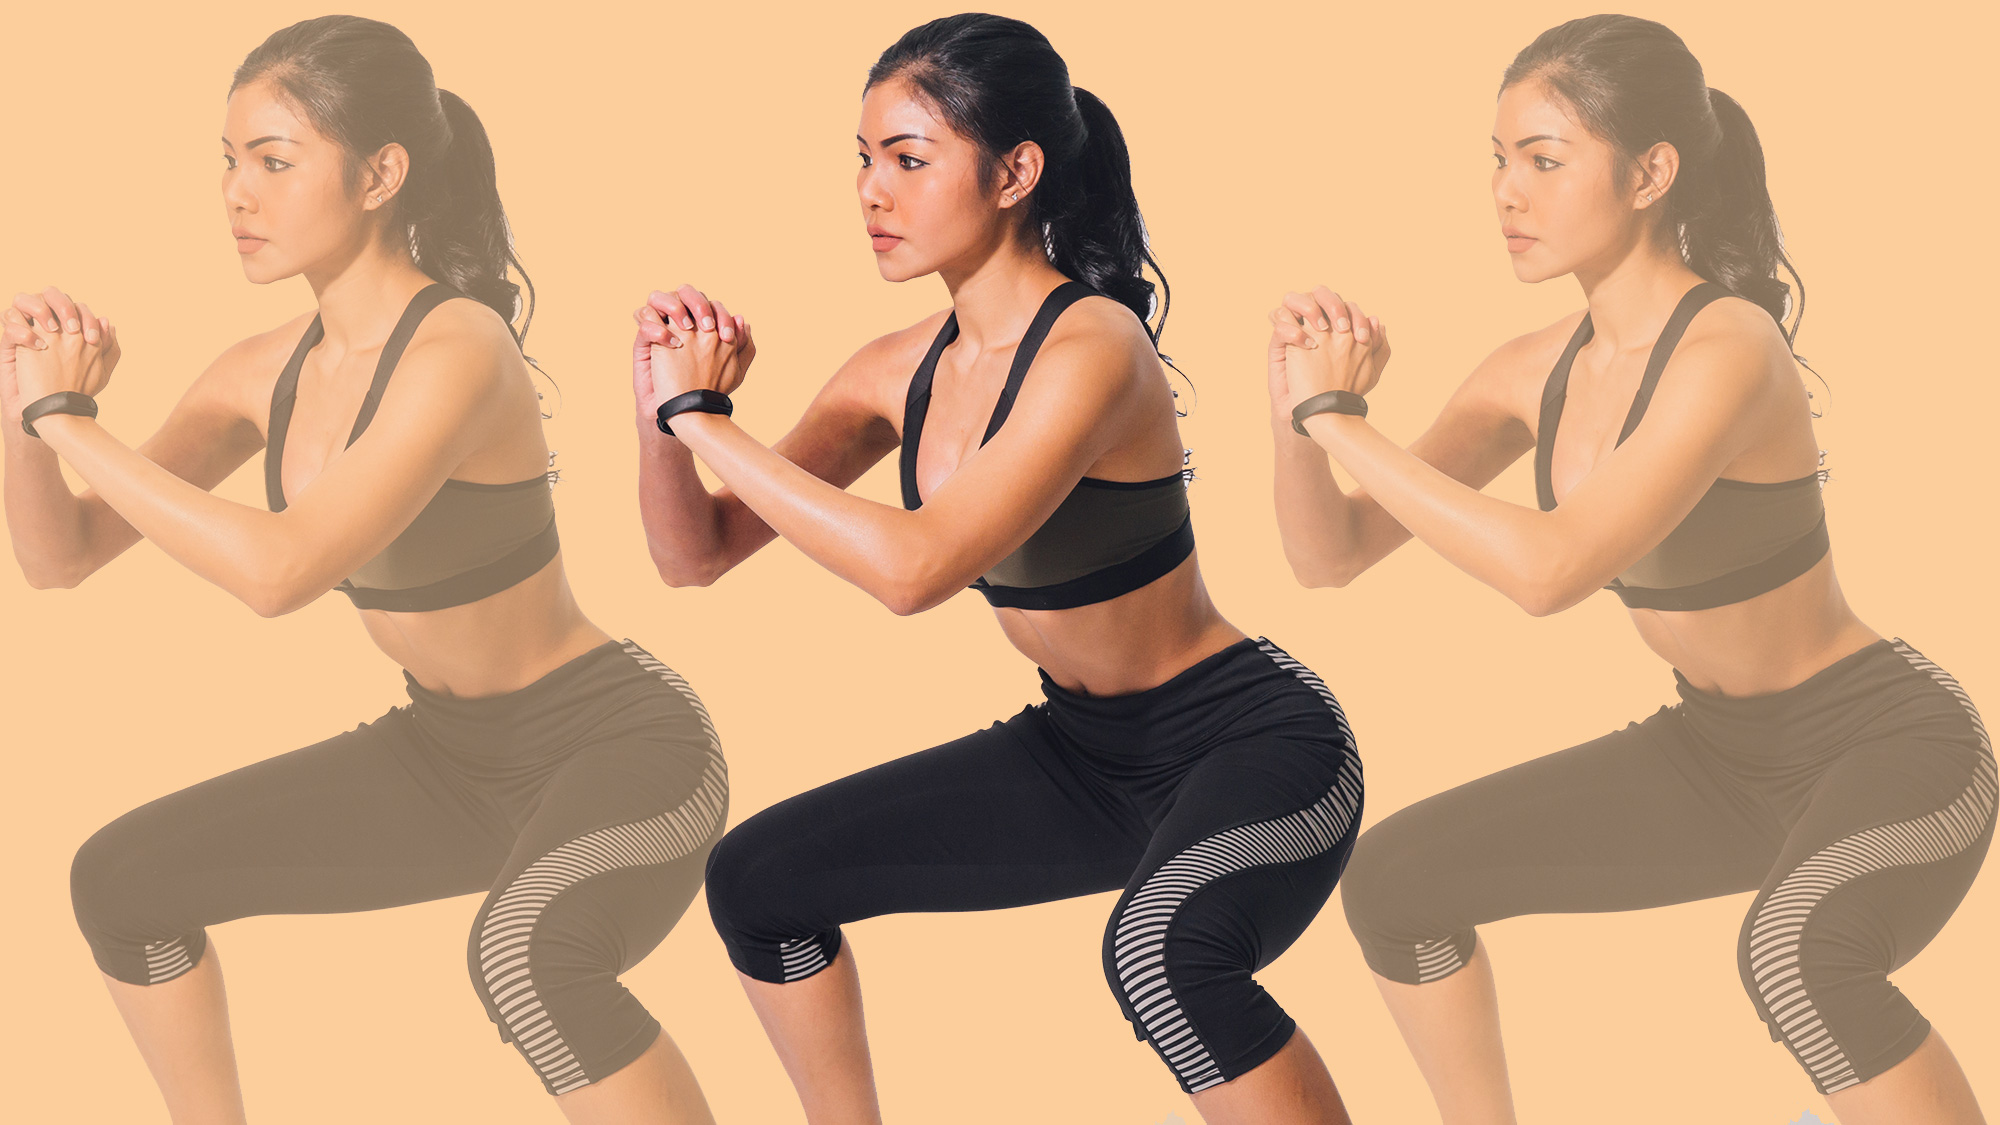 Bum and tum workout challenge: get toned in just 30 days